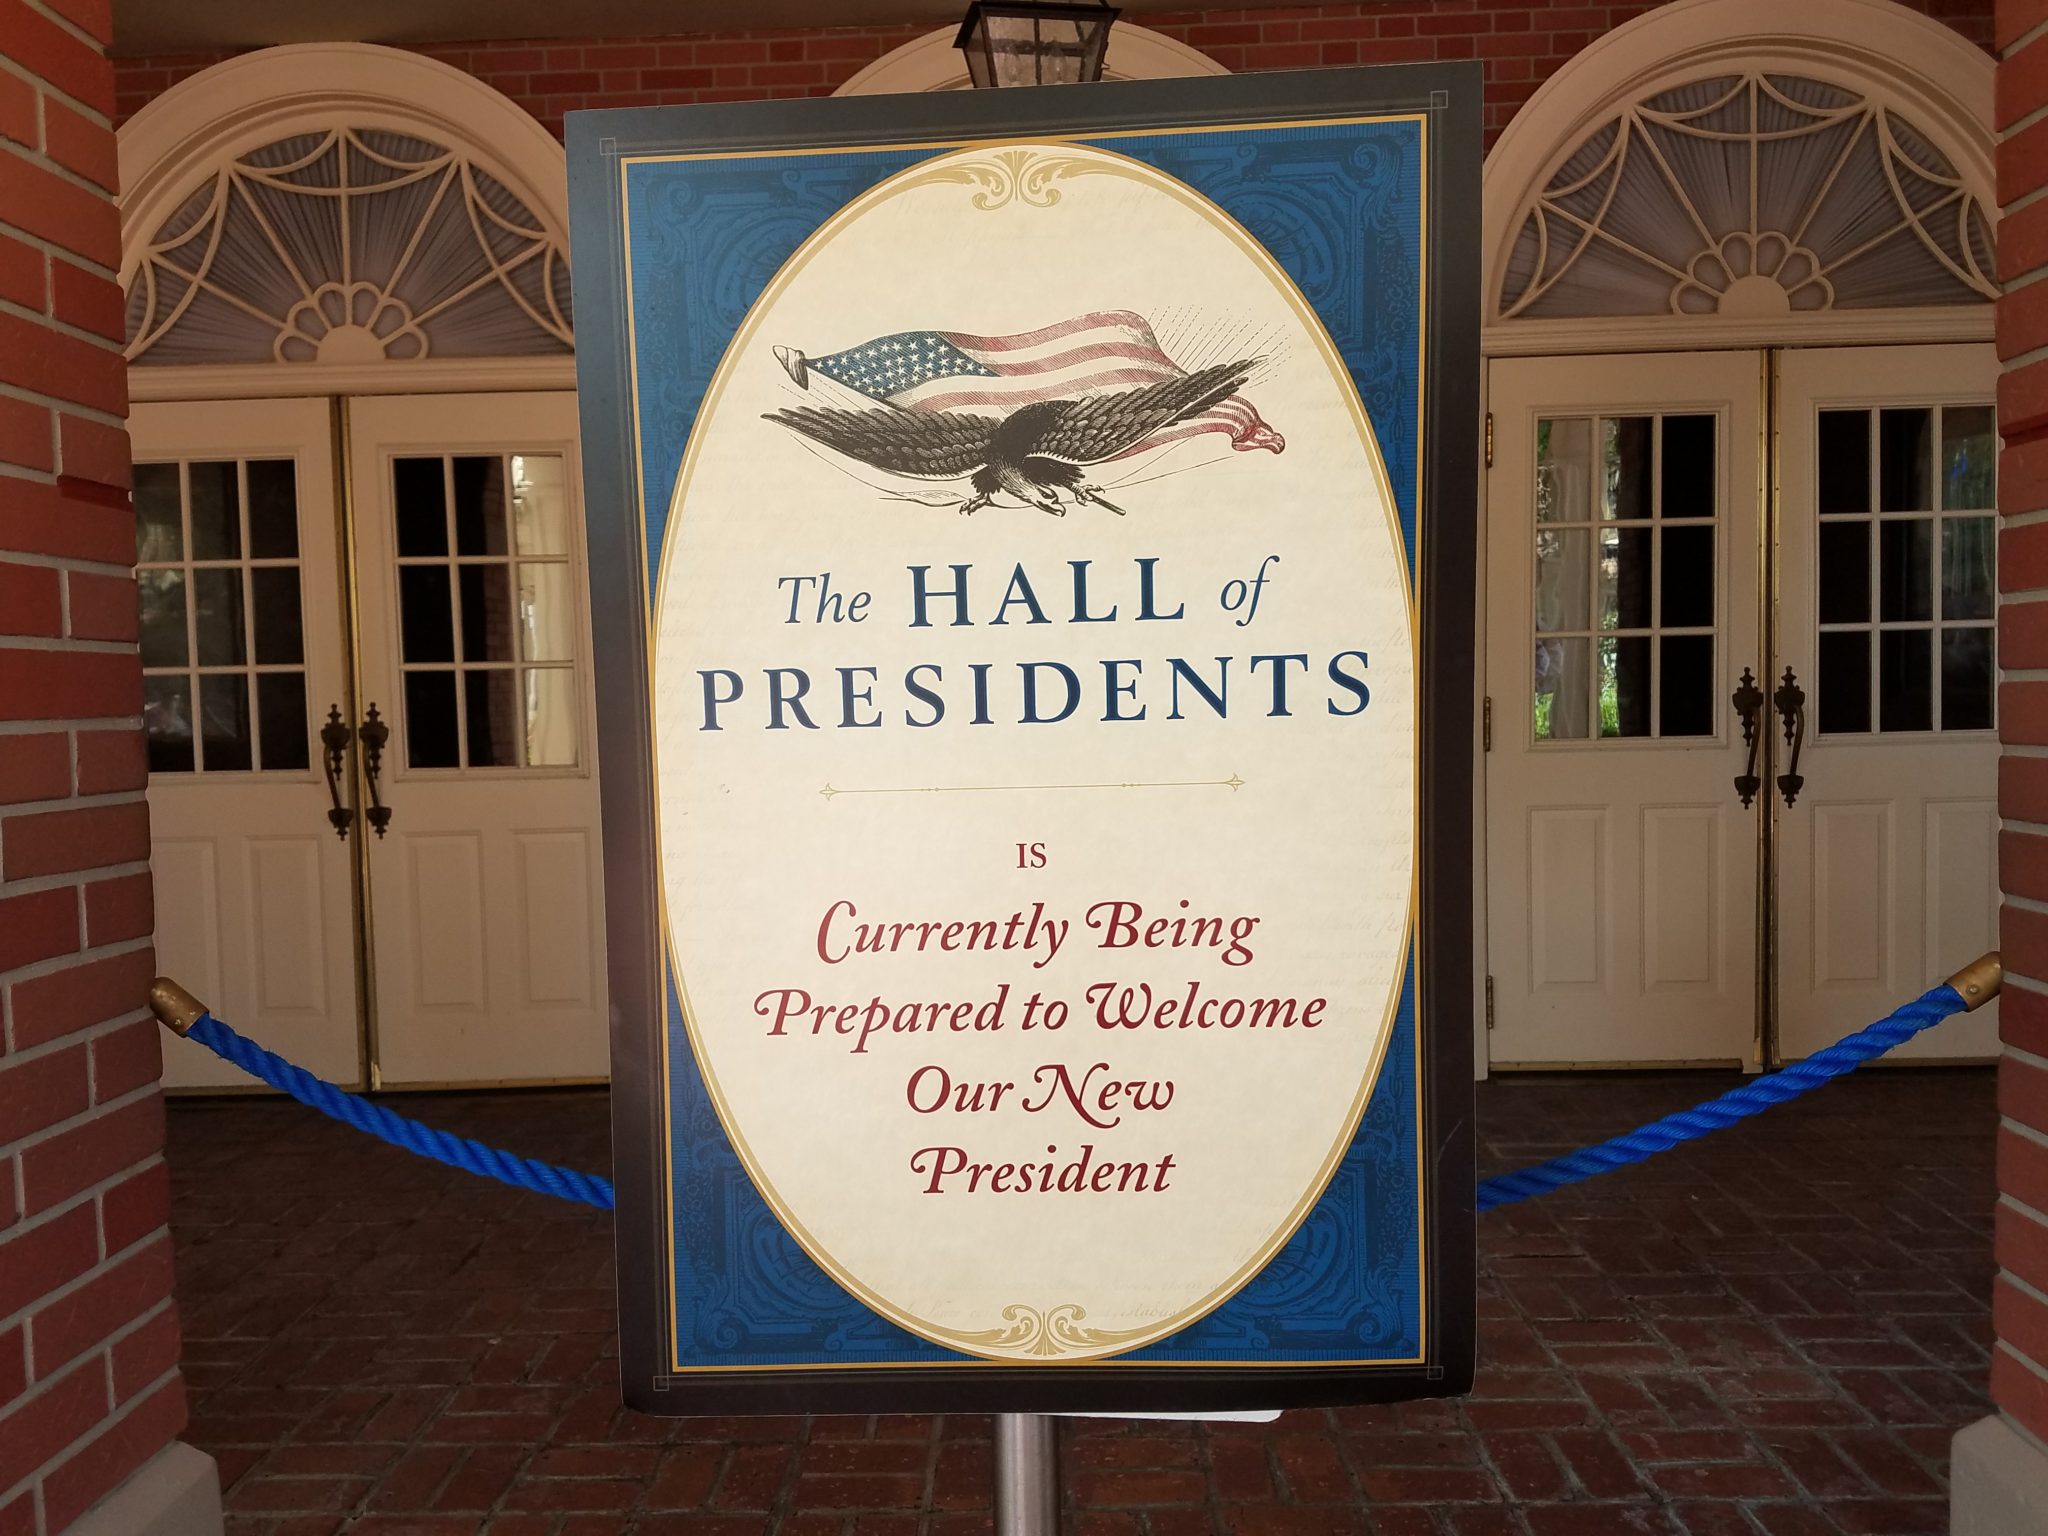 Magic Kingdom’s Hall of Presidents Experiences Delayed Reopening Date